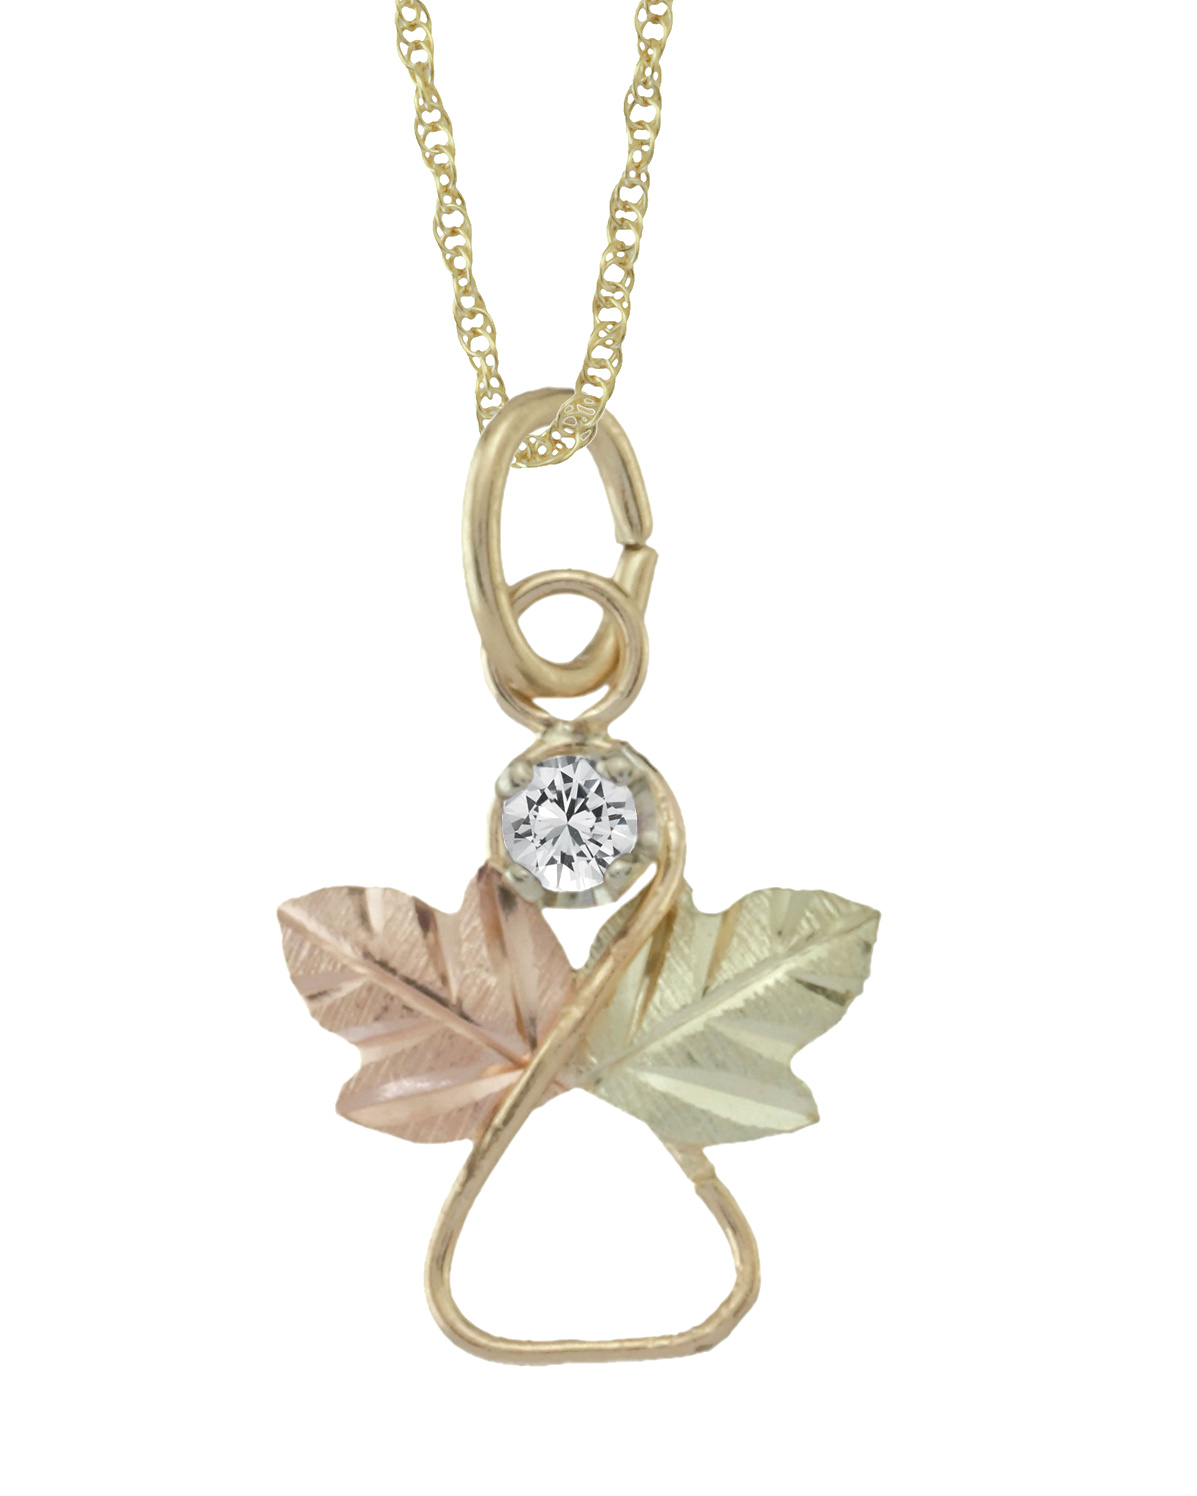 White Topaz Angel Heart Pendant Necklace, 10k Yellow Gold, 12k Green and Rose Gold Black Hills Gold Motif